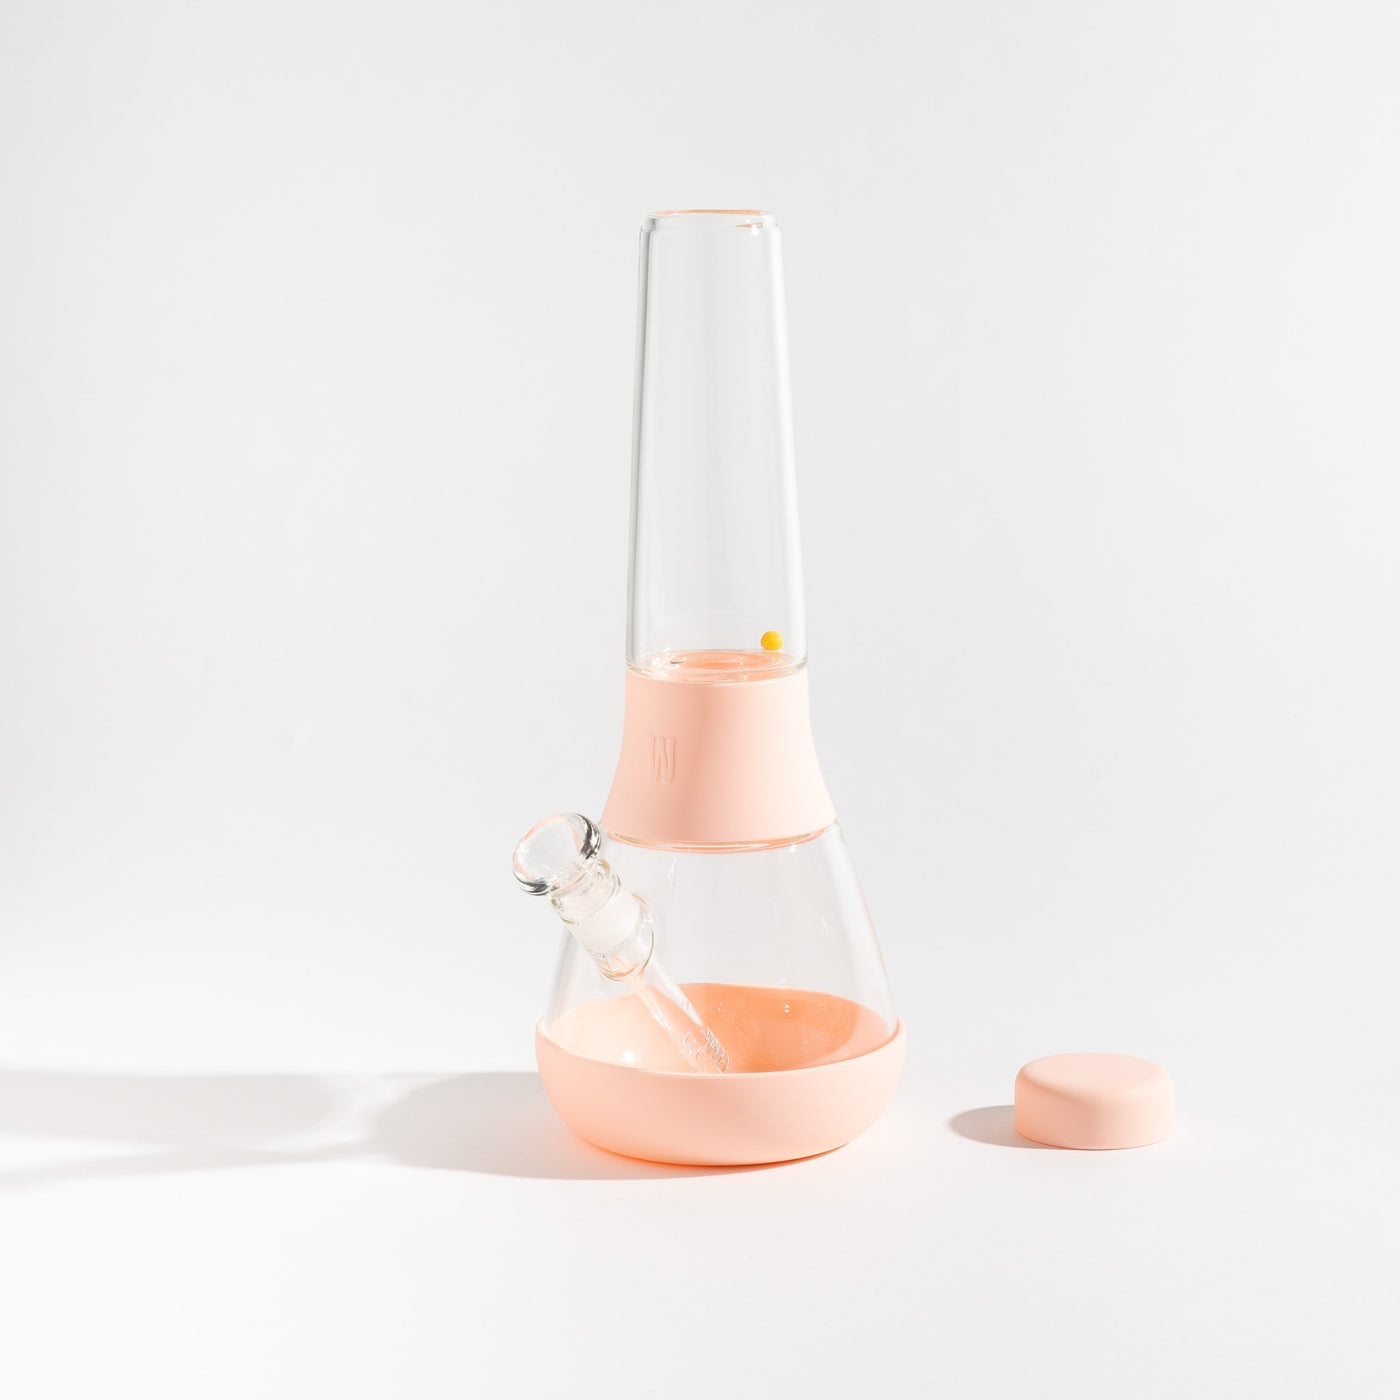 Detachable glass bong with bubblegum pink silicone covers on a white background.